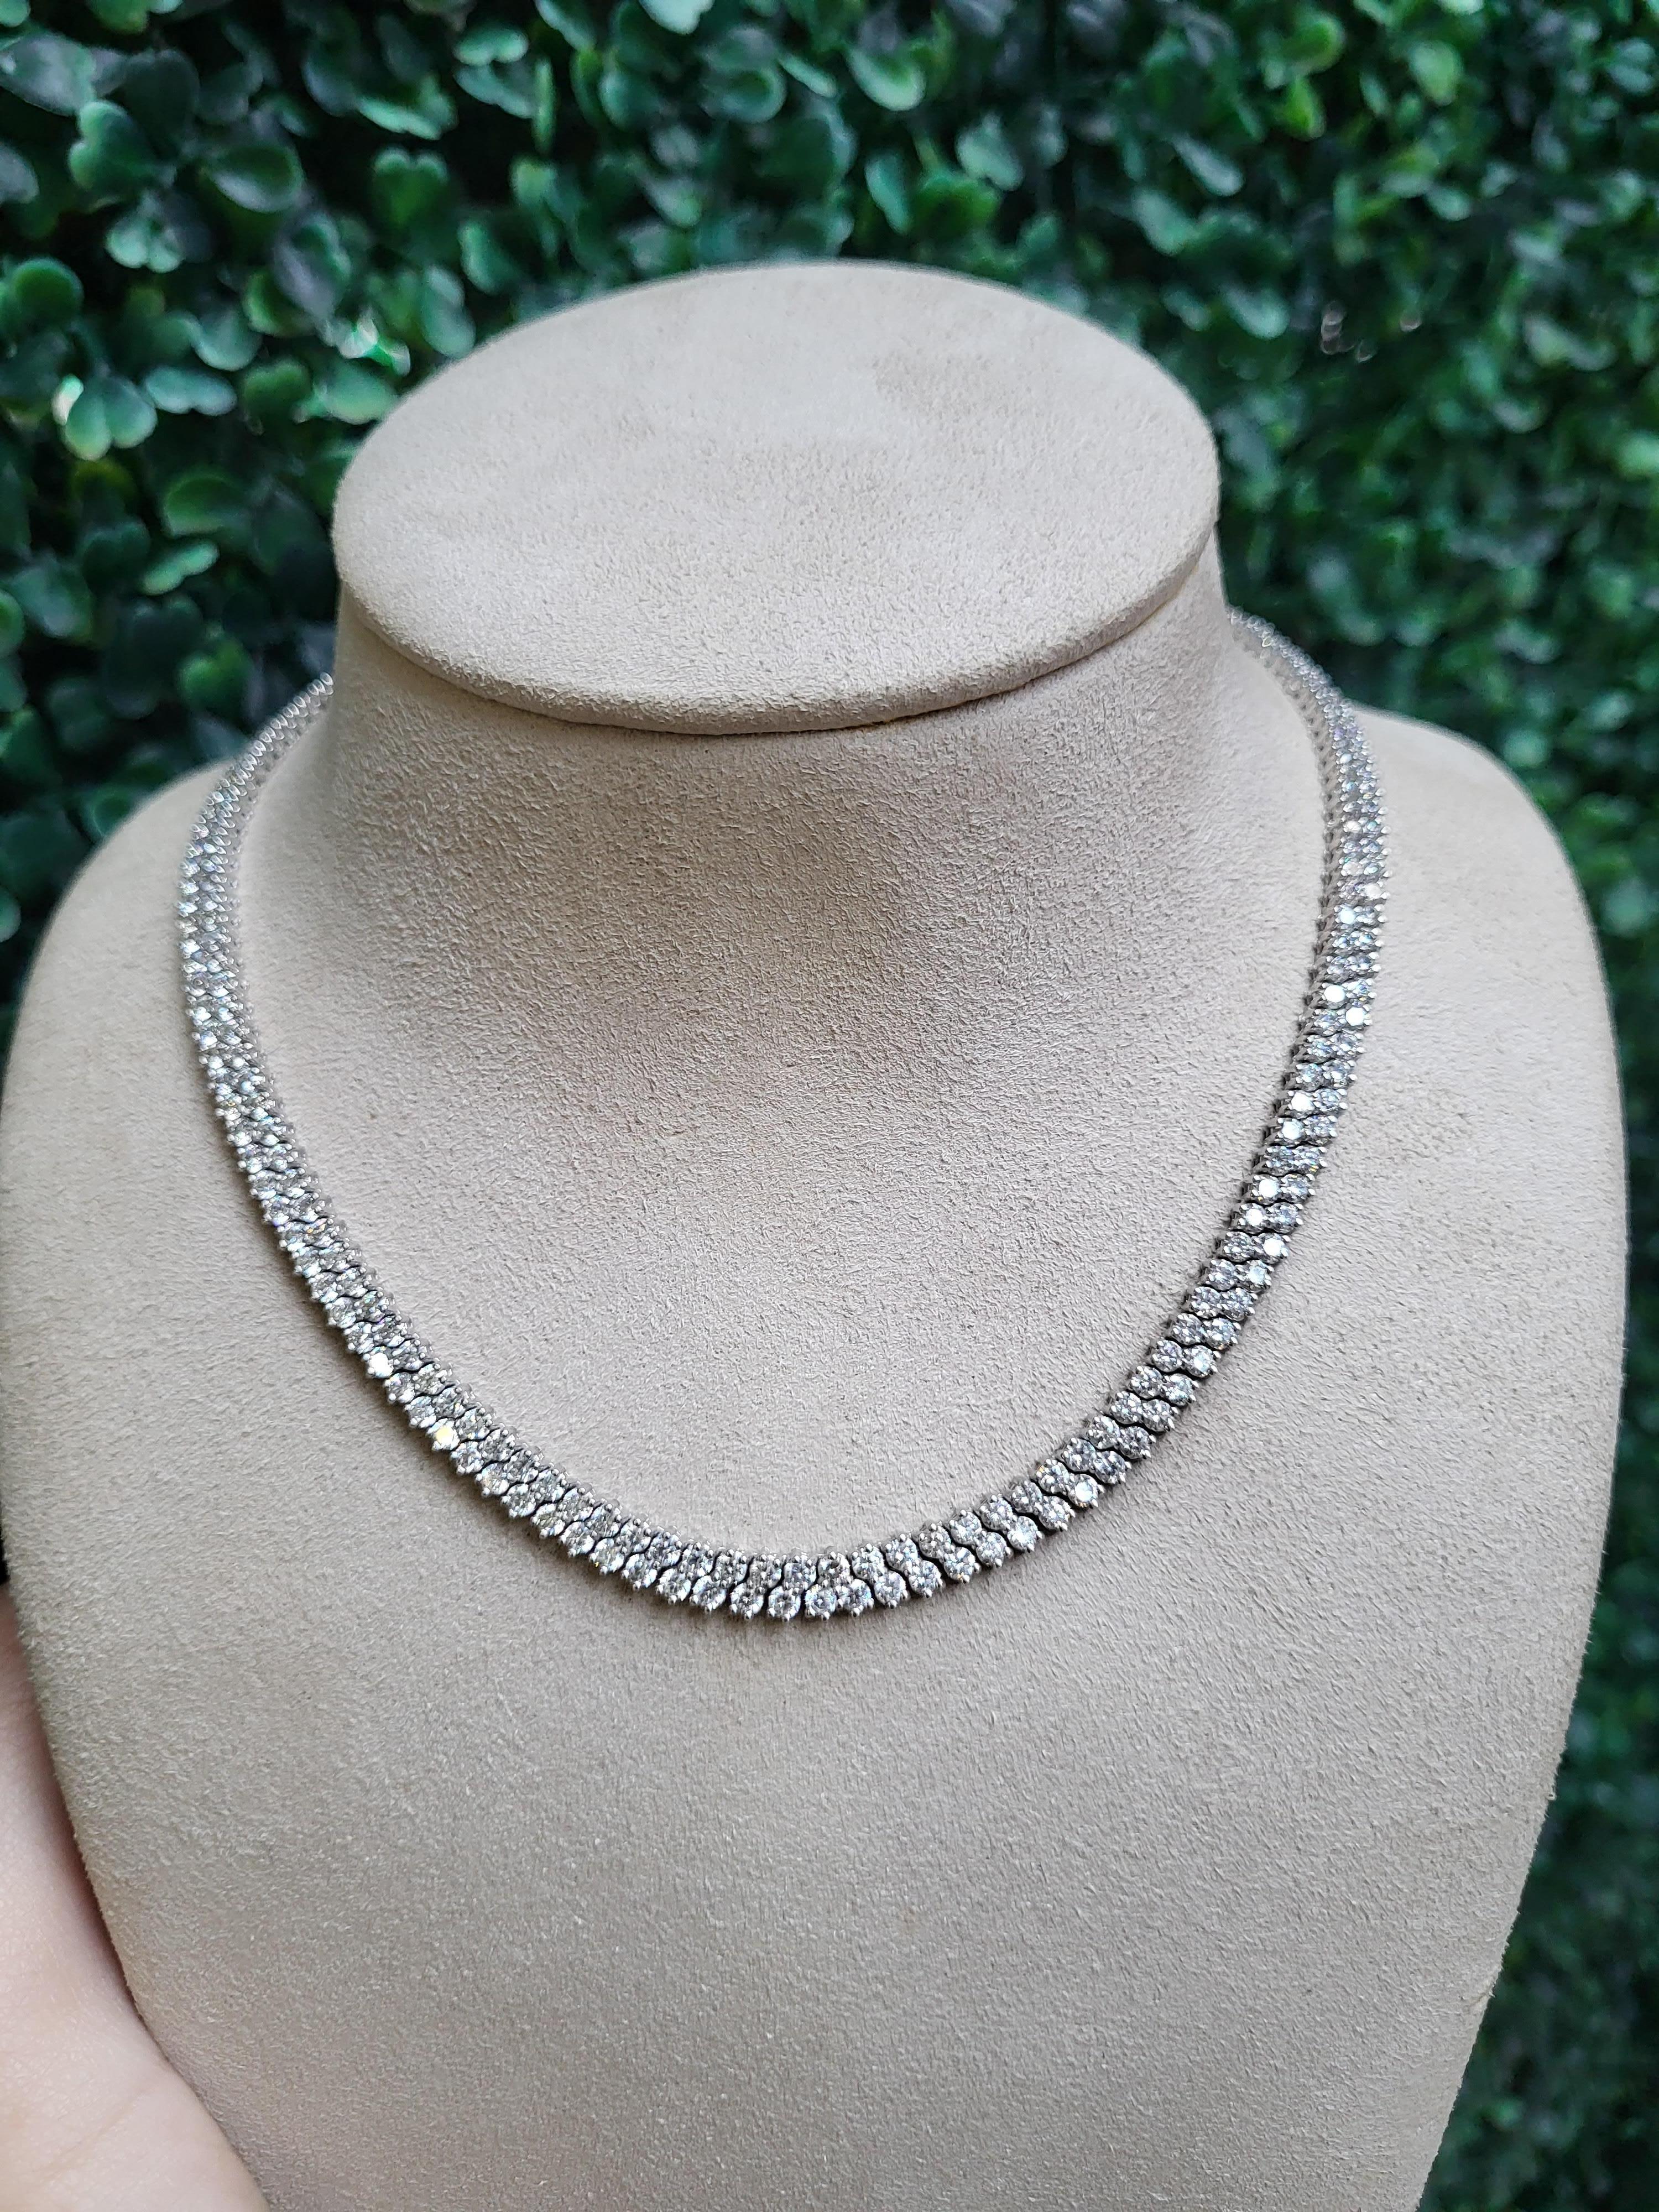 14 Karat White Gold 10.13 Carat Total Weight Diamond Two Row Choker Necklace For Sale 1